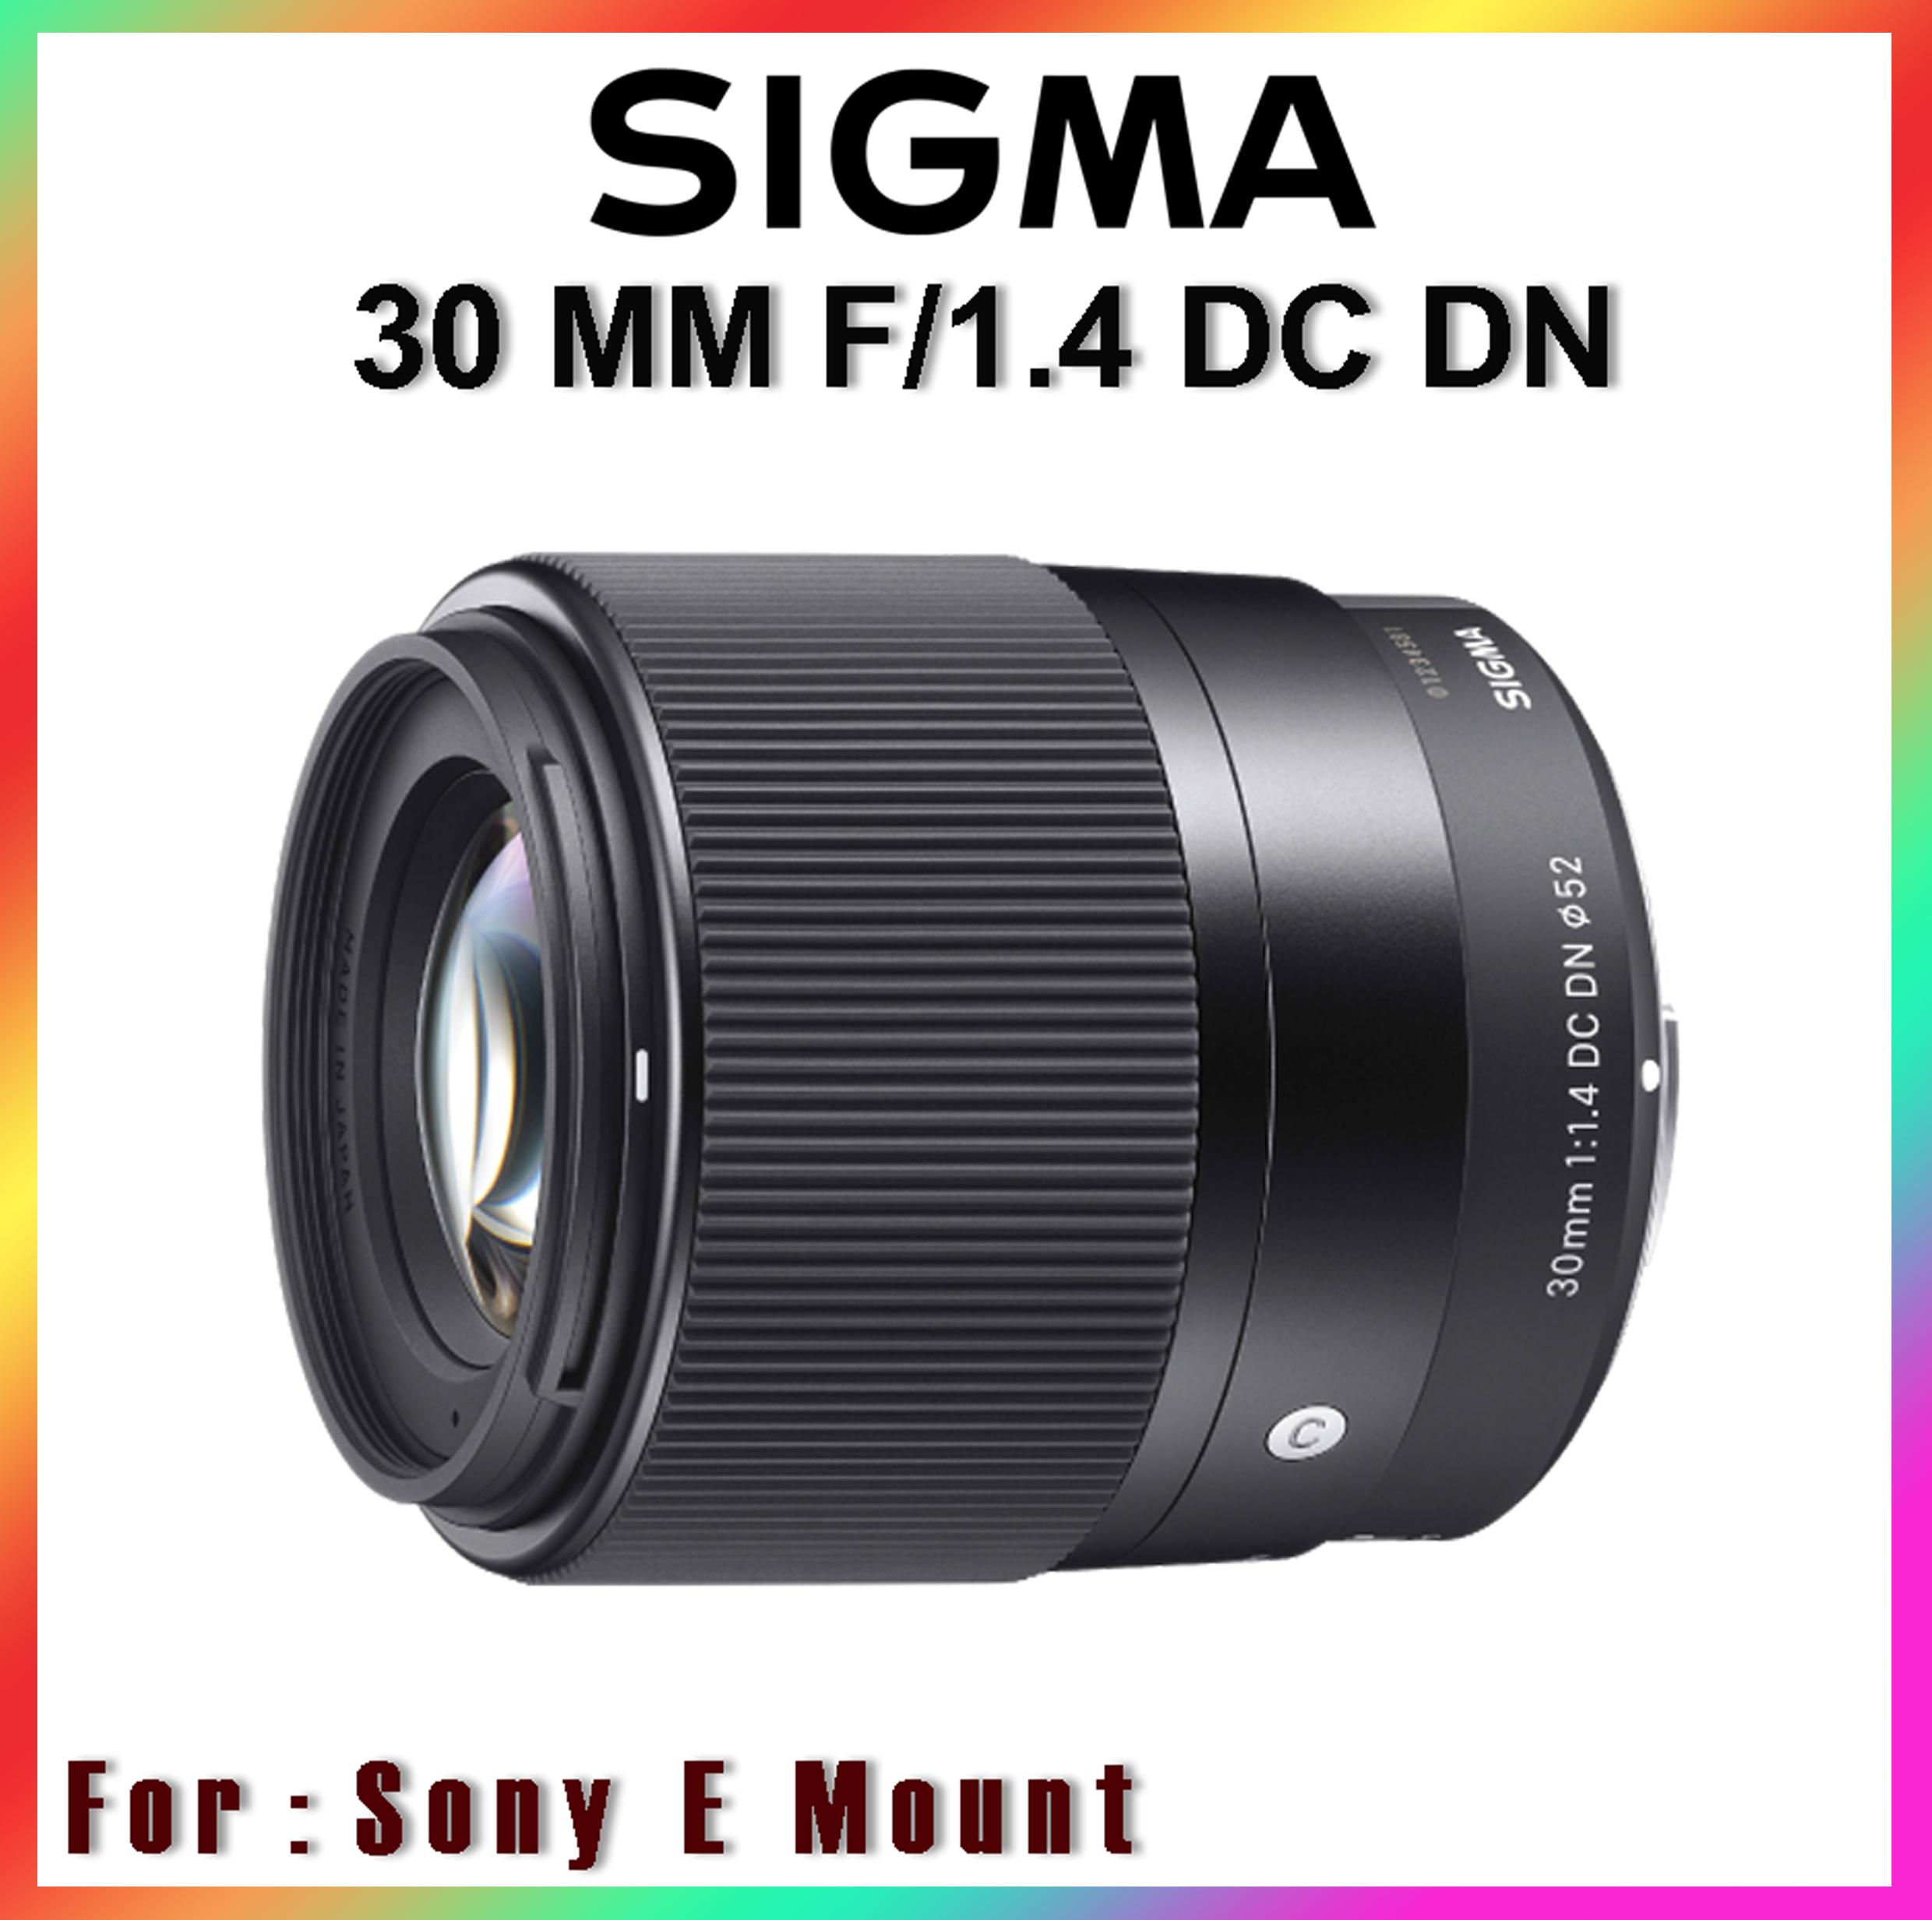 Sigma 30 MM F/1.4 DC DN (C) For Sony E Mount